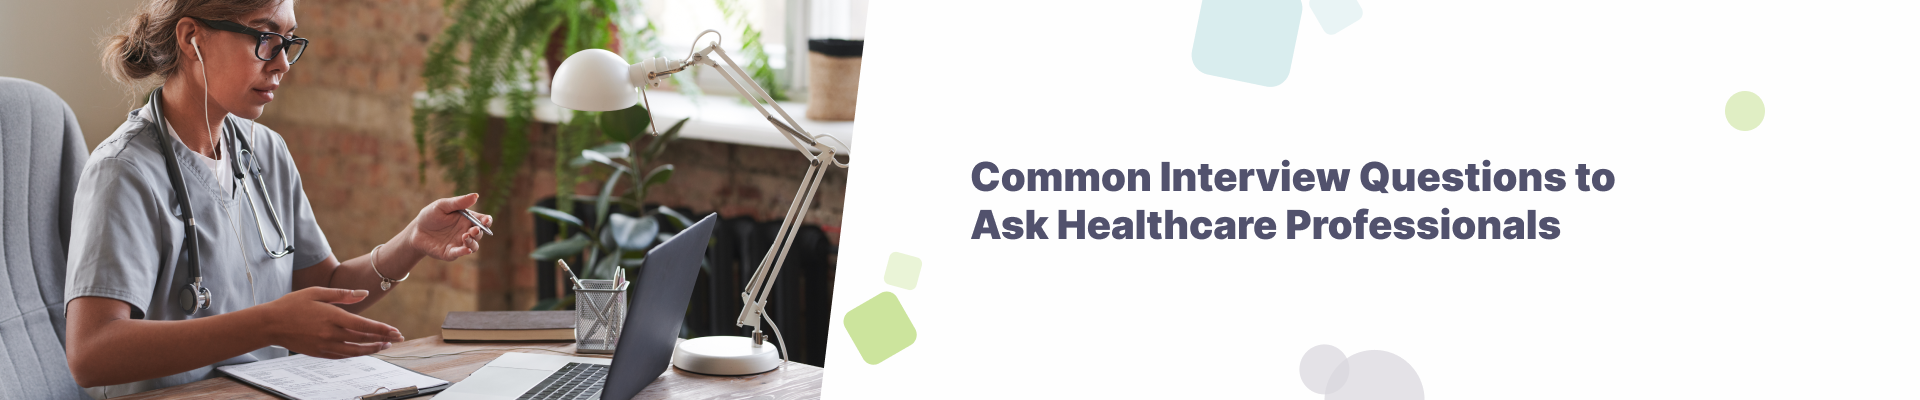 Common Interview Questions to Ask Healthcare Professionals